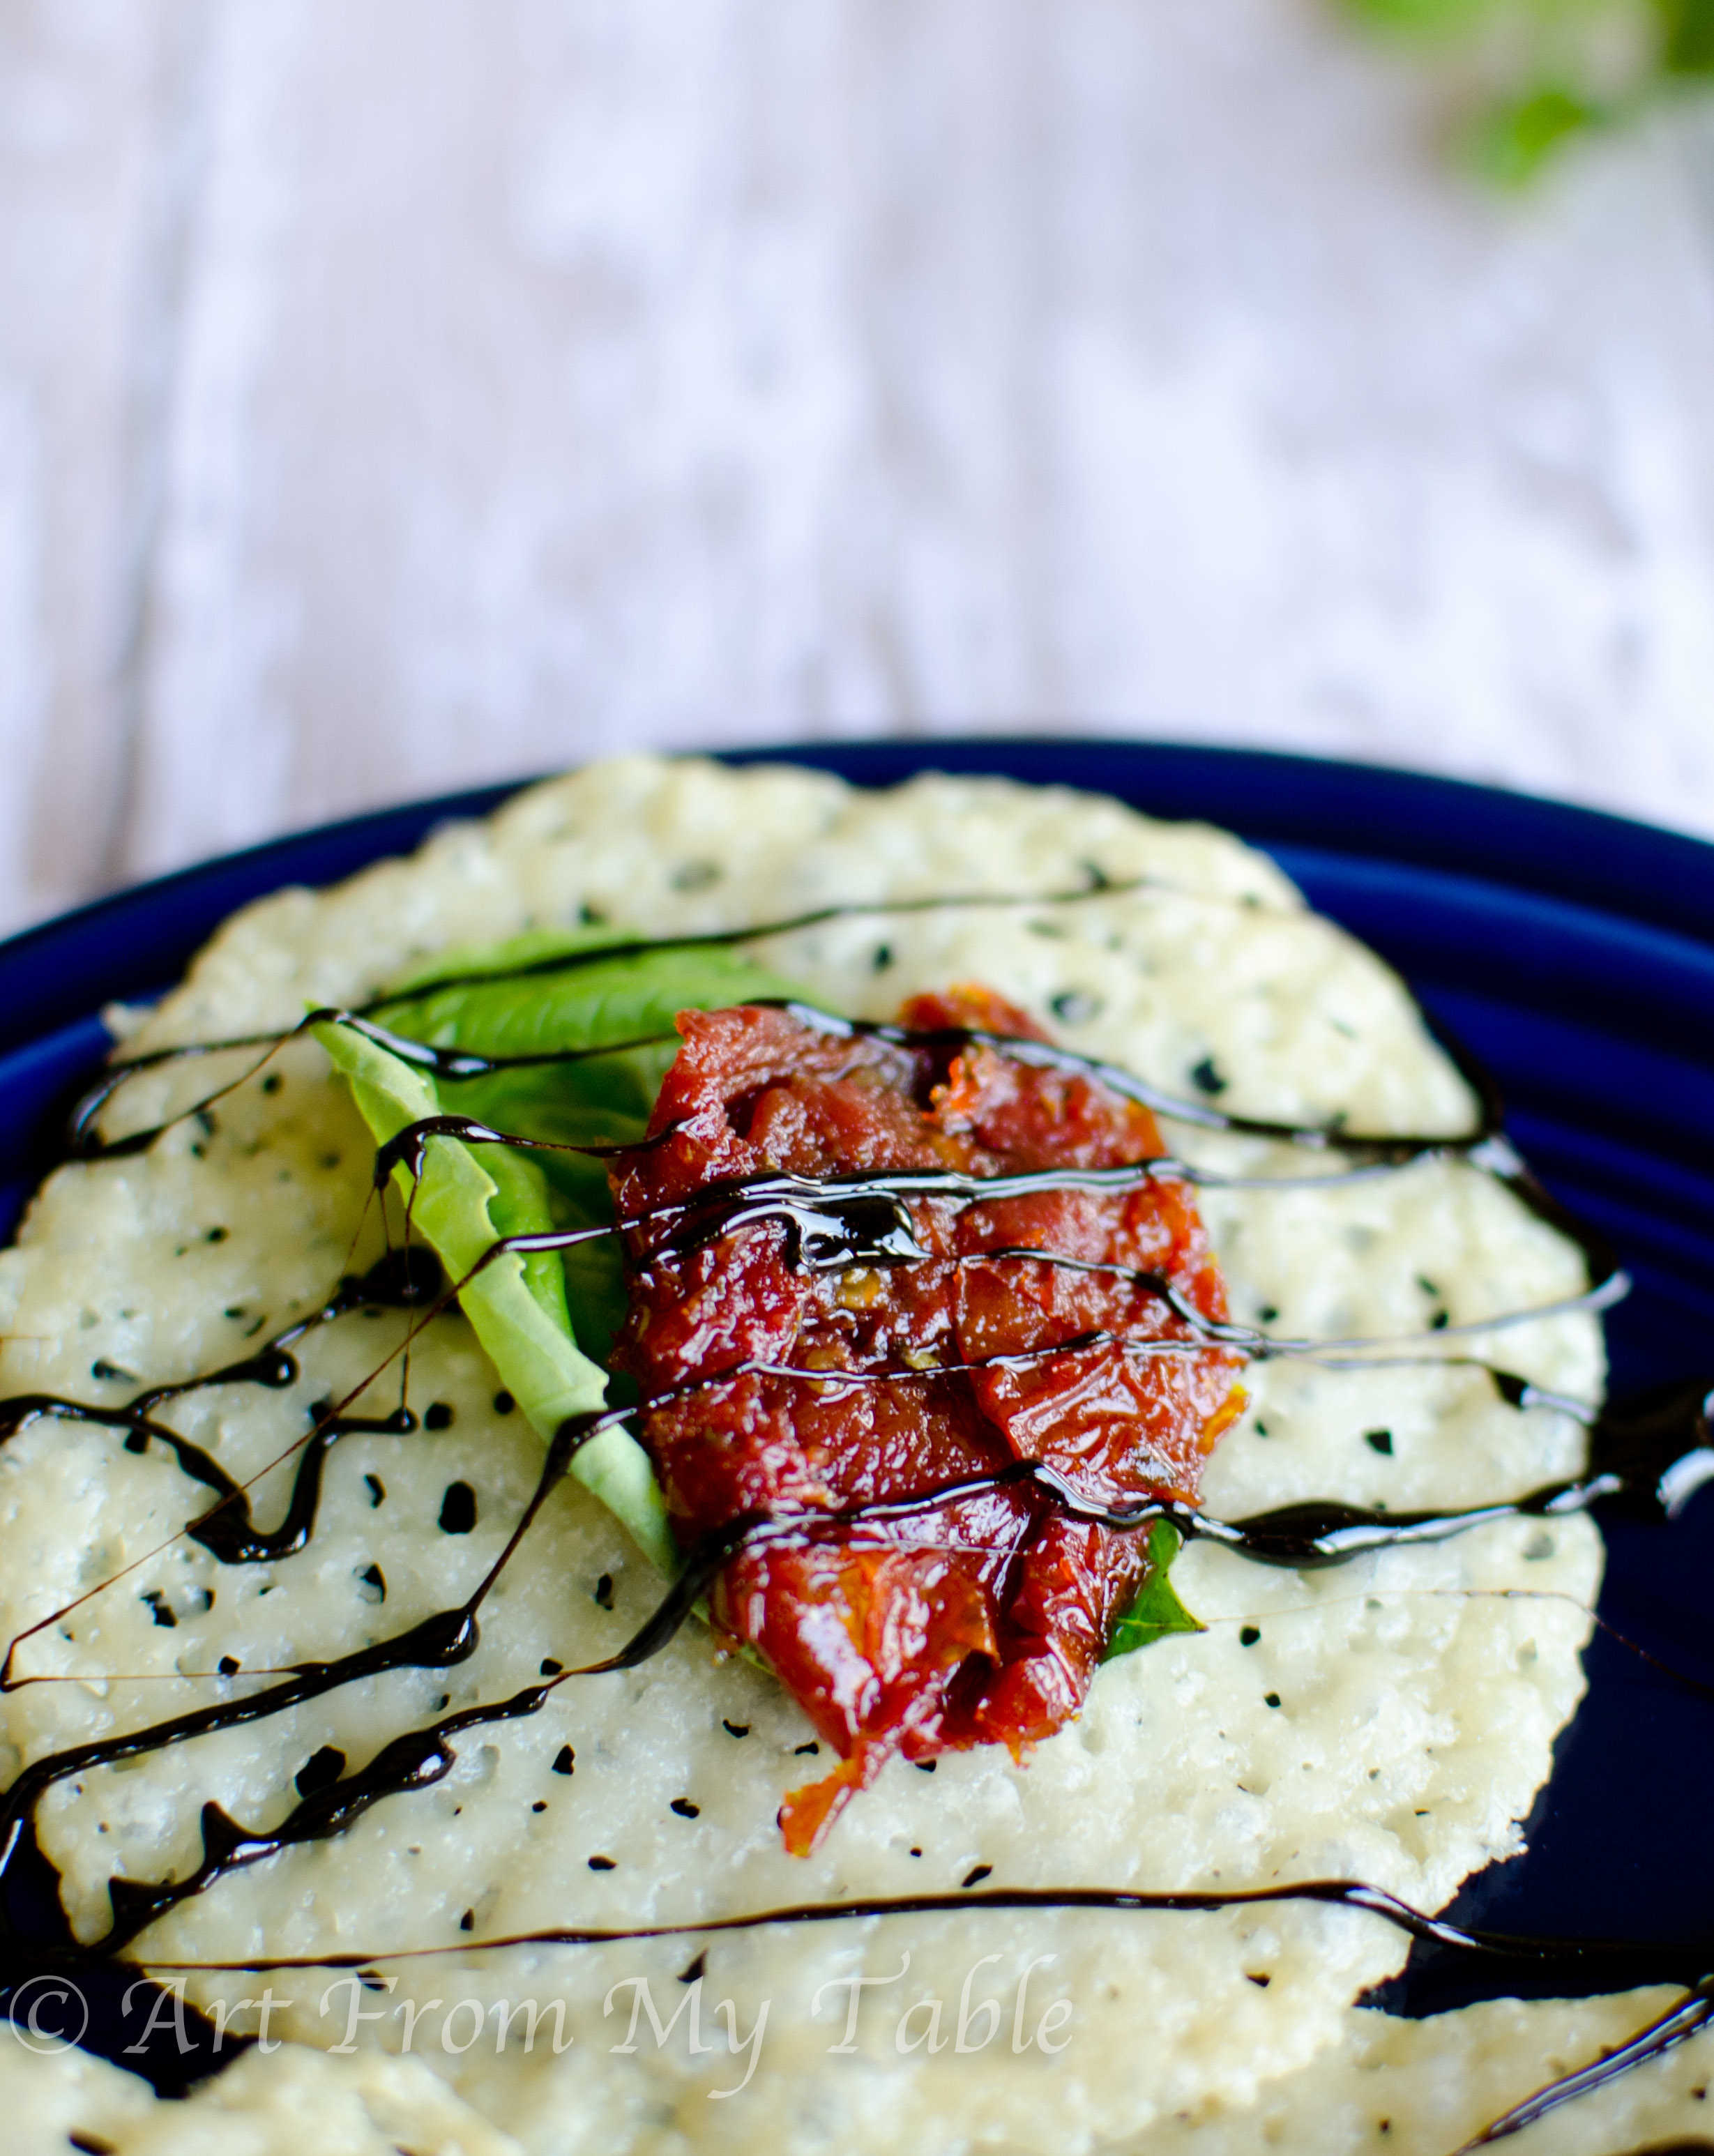 Baked Parmesan cheese crisp topped with a fresh basil leaf, sun-dried tomato, and drizzled with balsamic reduction.